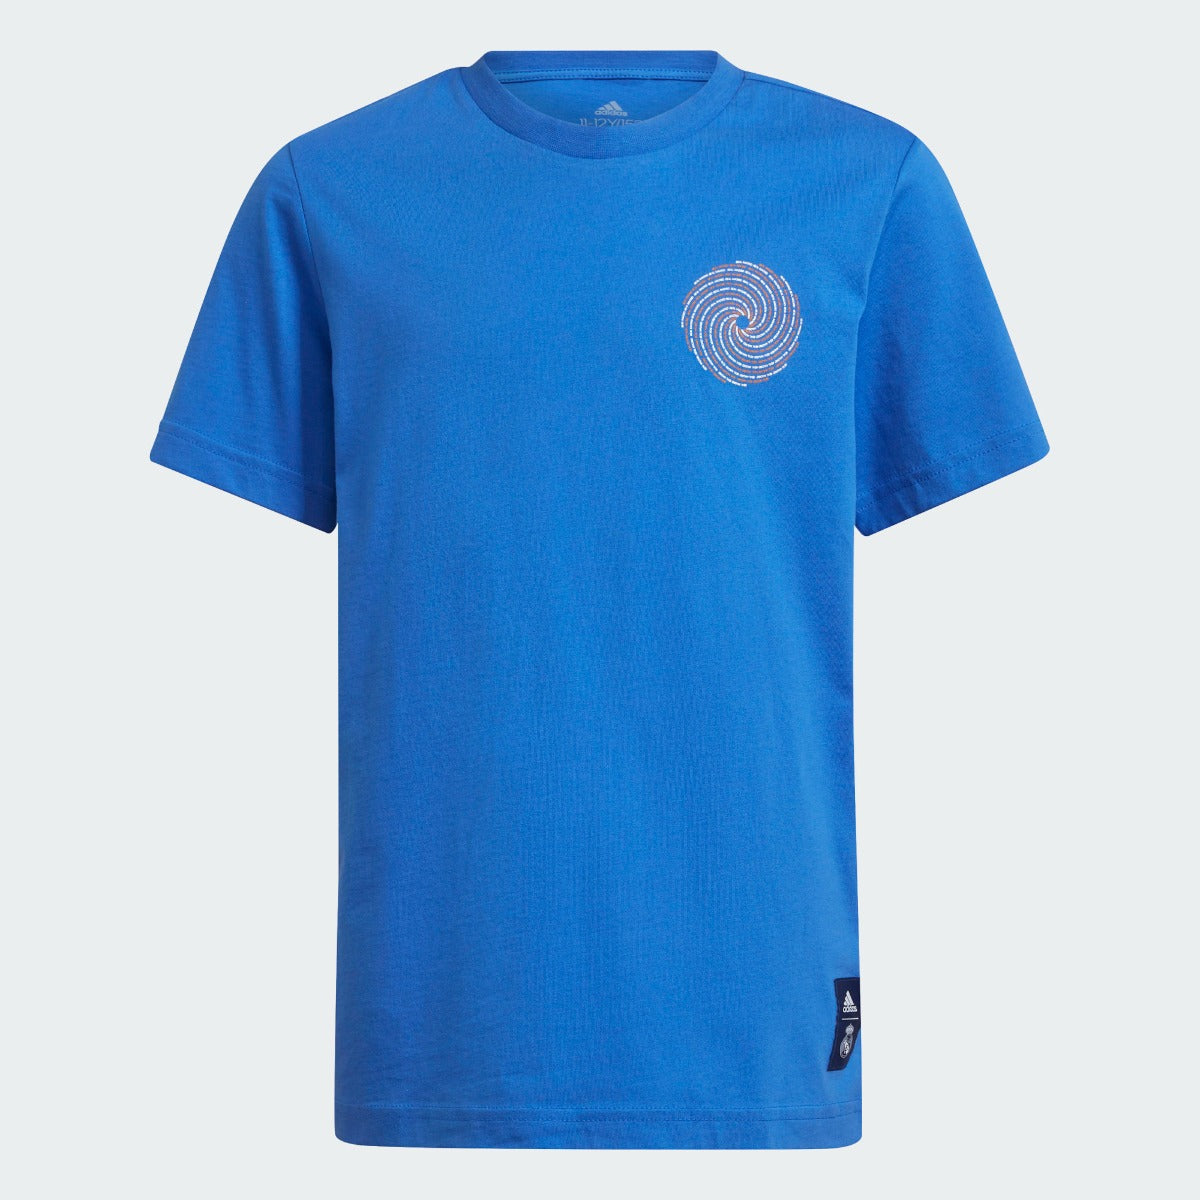 Adidas 2021-22 Real Madrid Youth Tee - Hi Res Blue (Front)